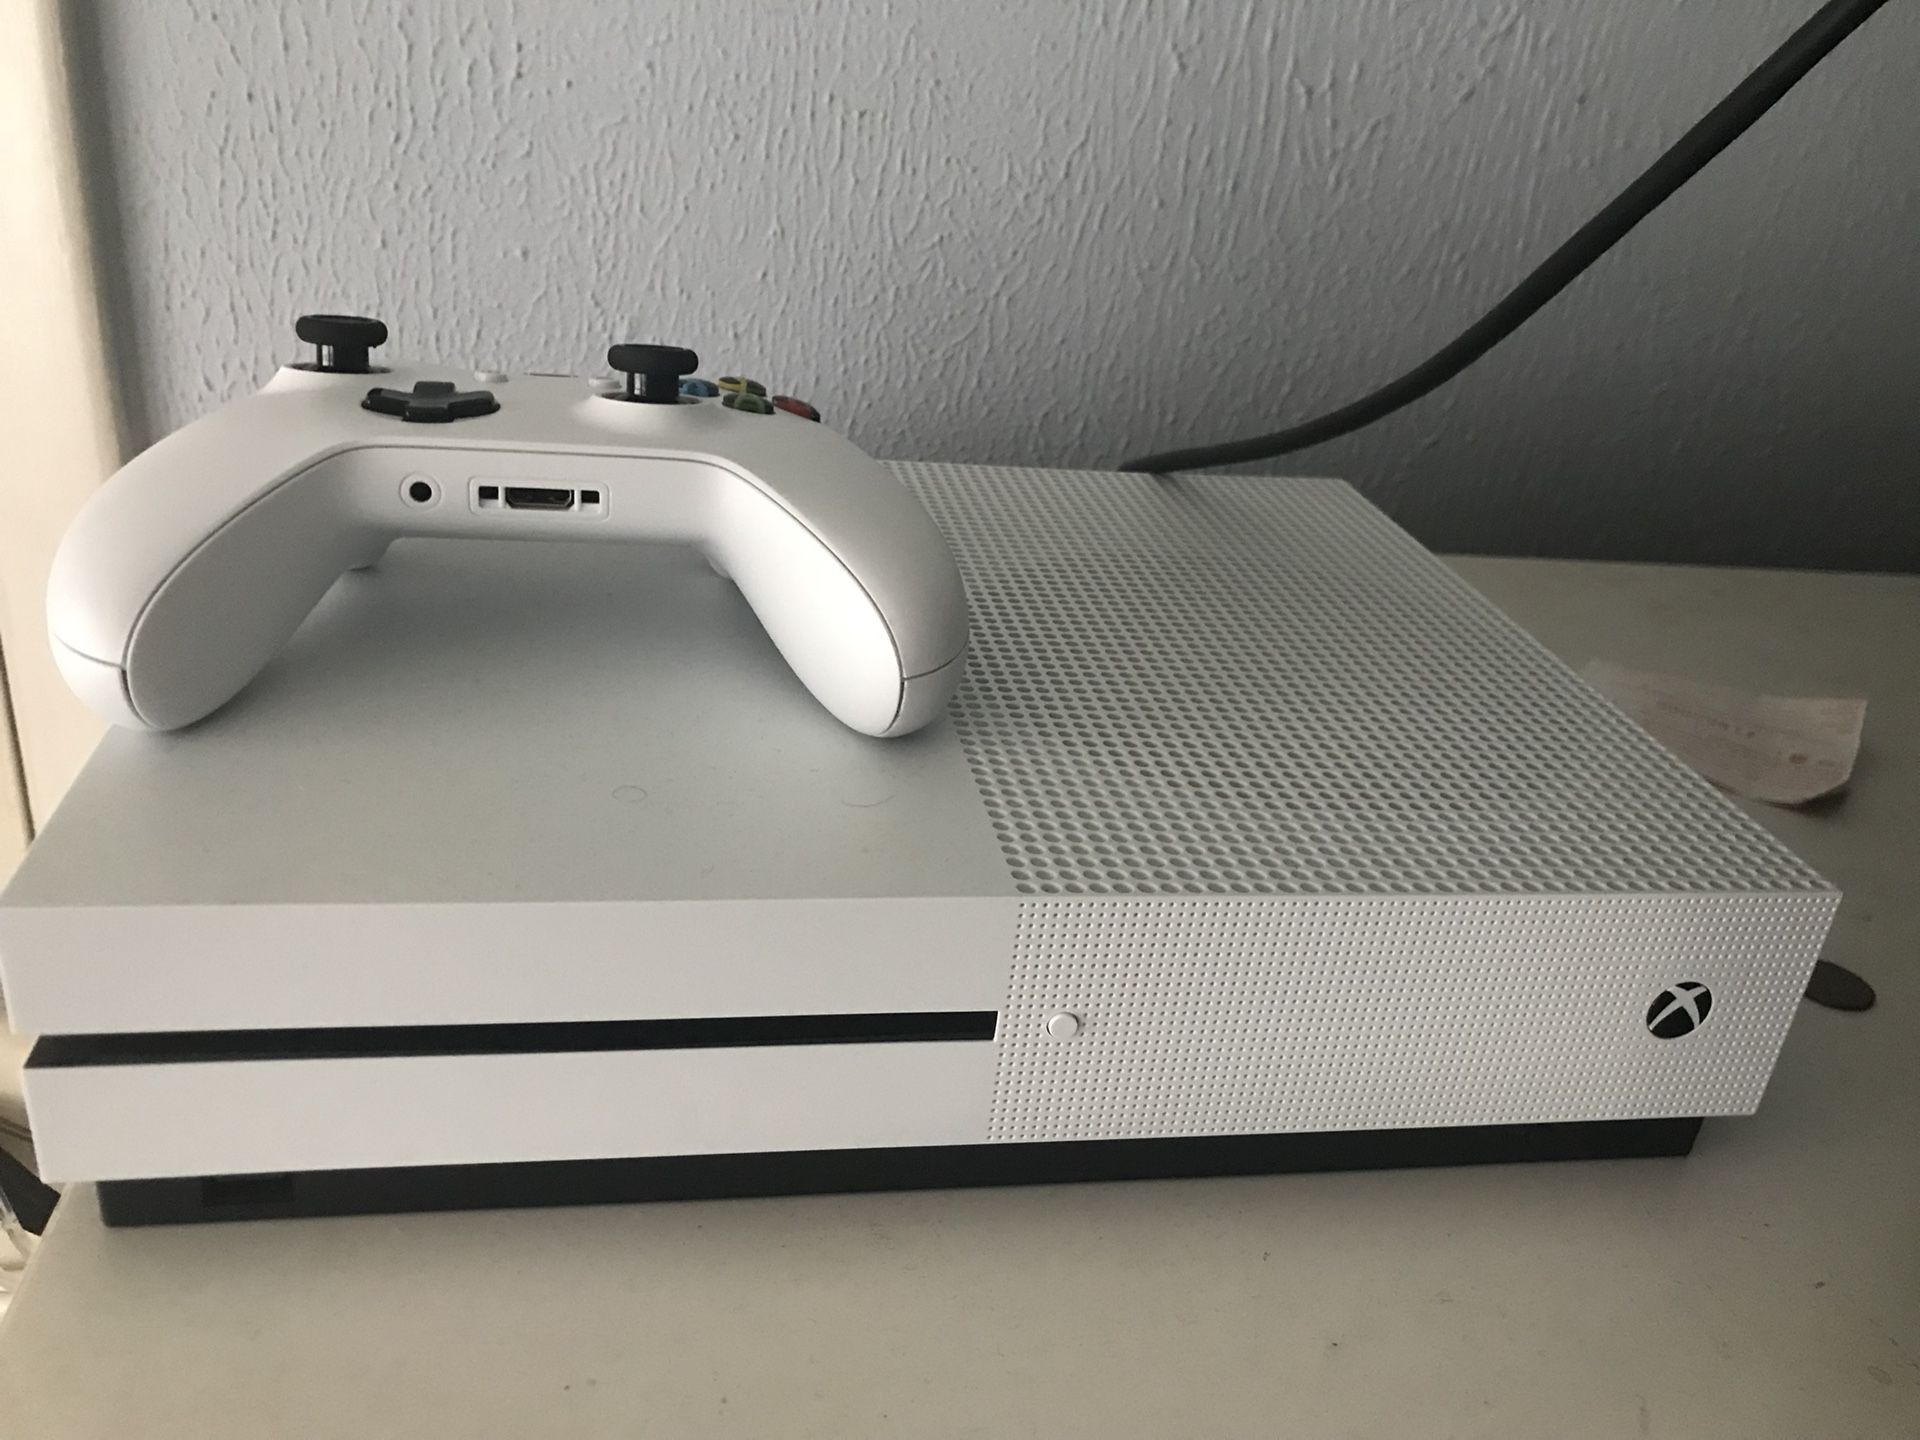 Xbox One S (Includes Madden 18 and FIFA 17)